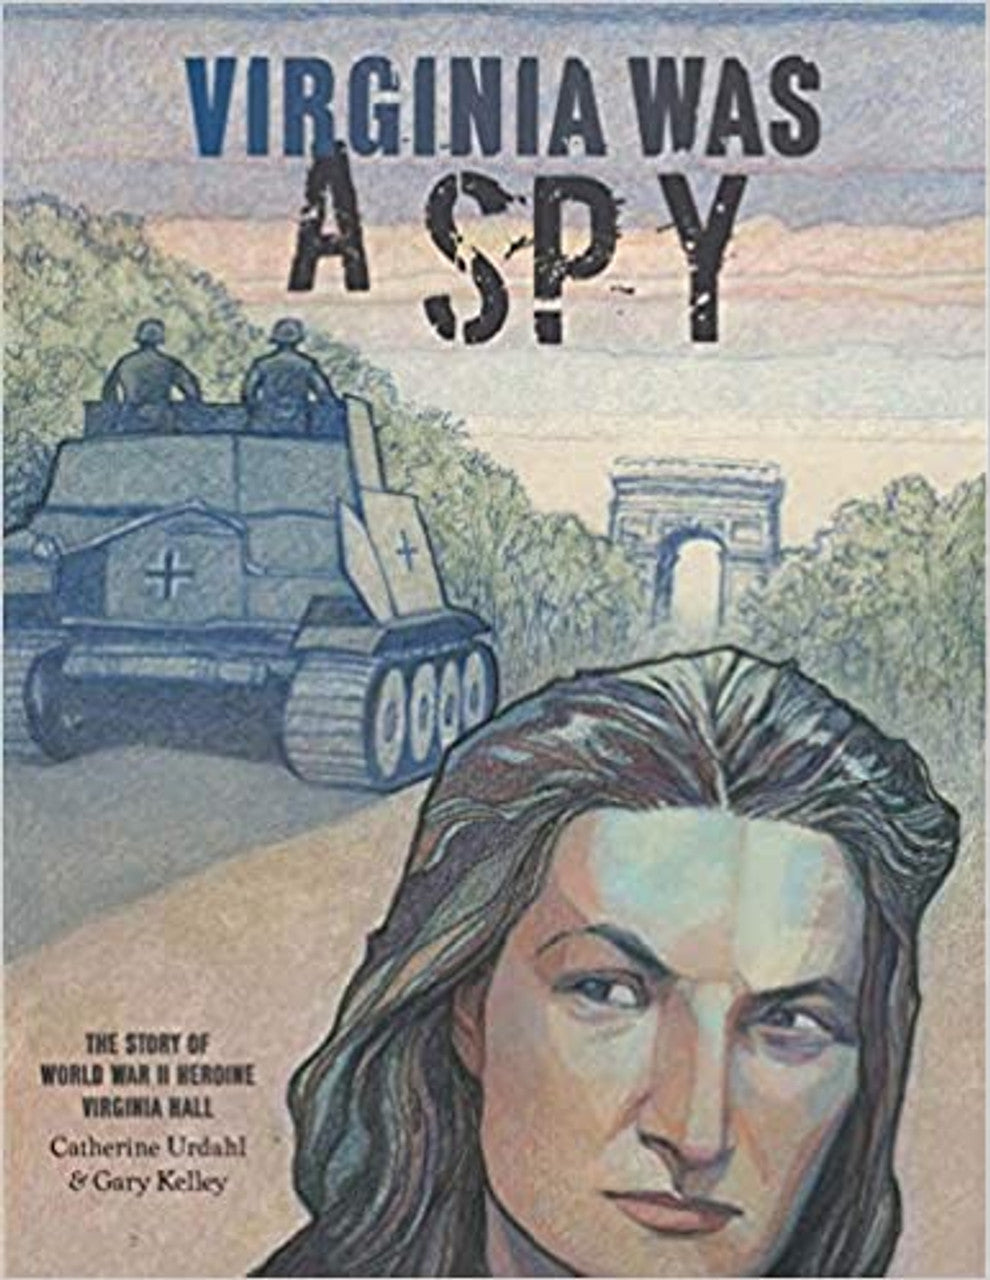 Virginia Was A Spy: The Story of WWII Heroine Virginia Hall